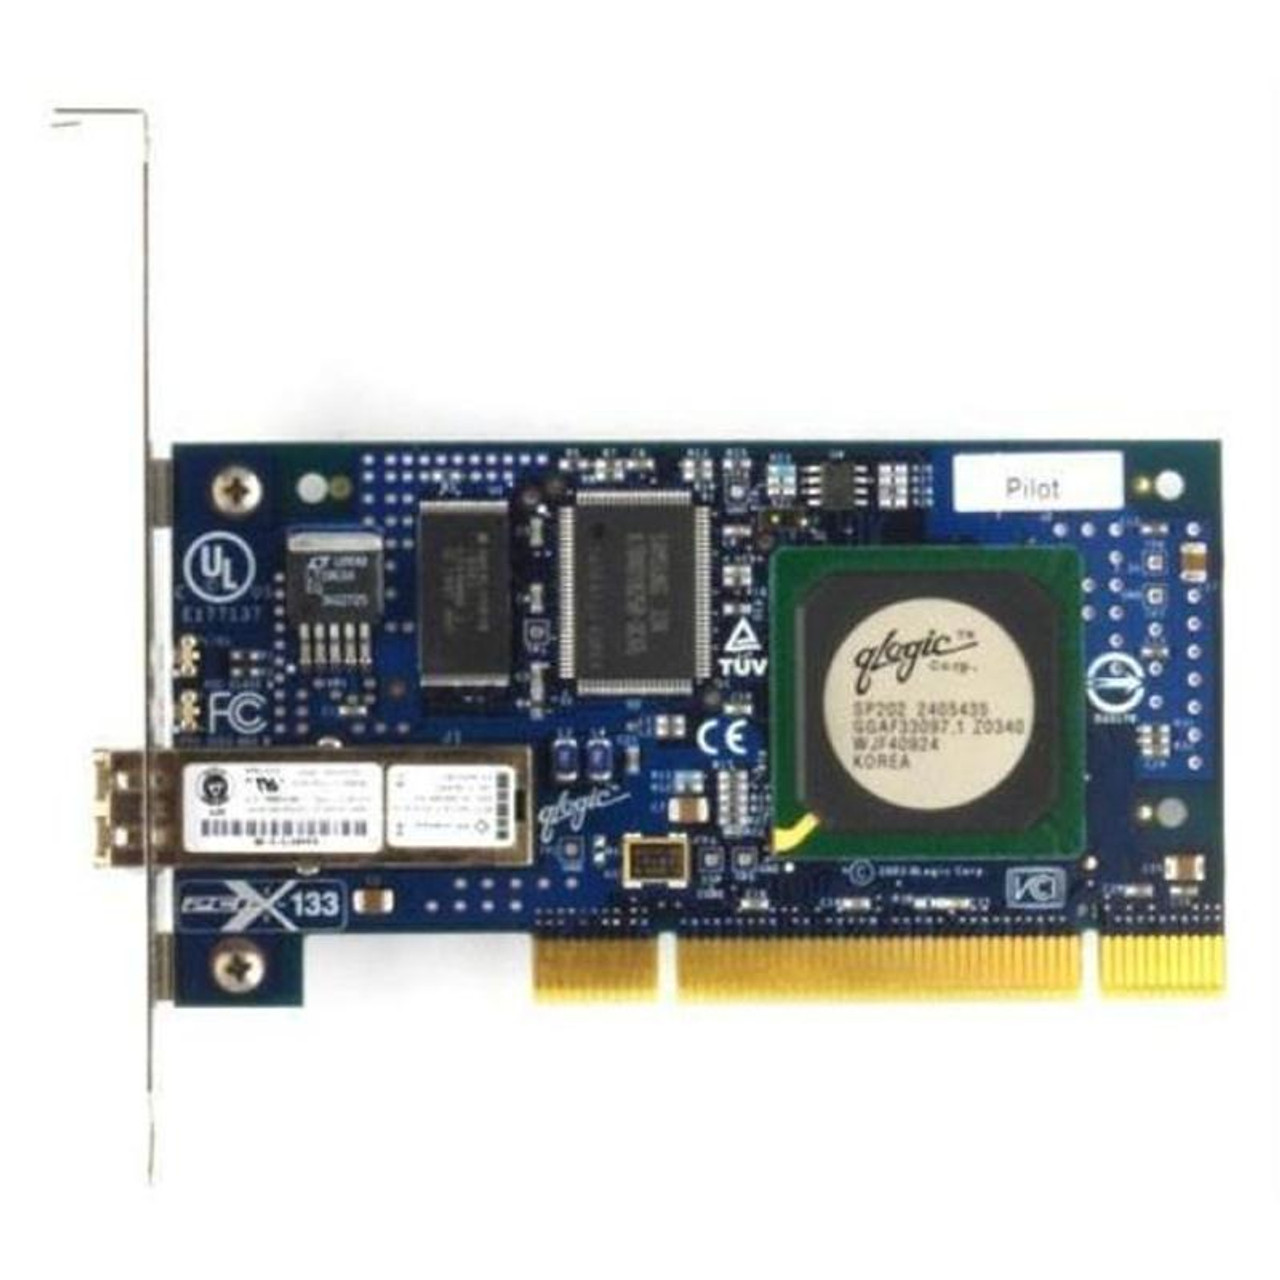 13N1873 IBM TotalStorage 13N1873 SMB Fibre Channel Host Bus Adapter 1 x PCI-x 2Gbps